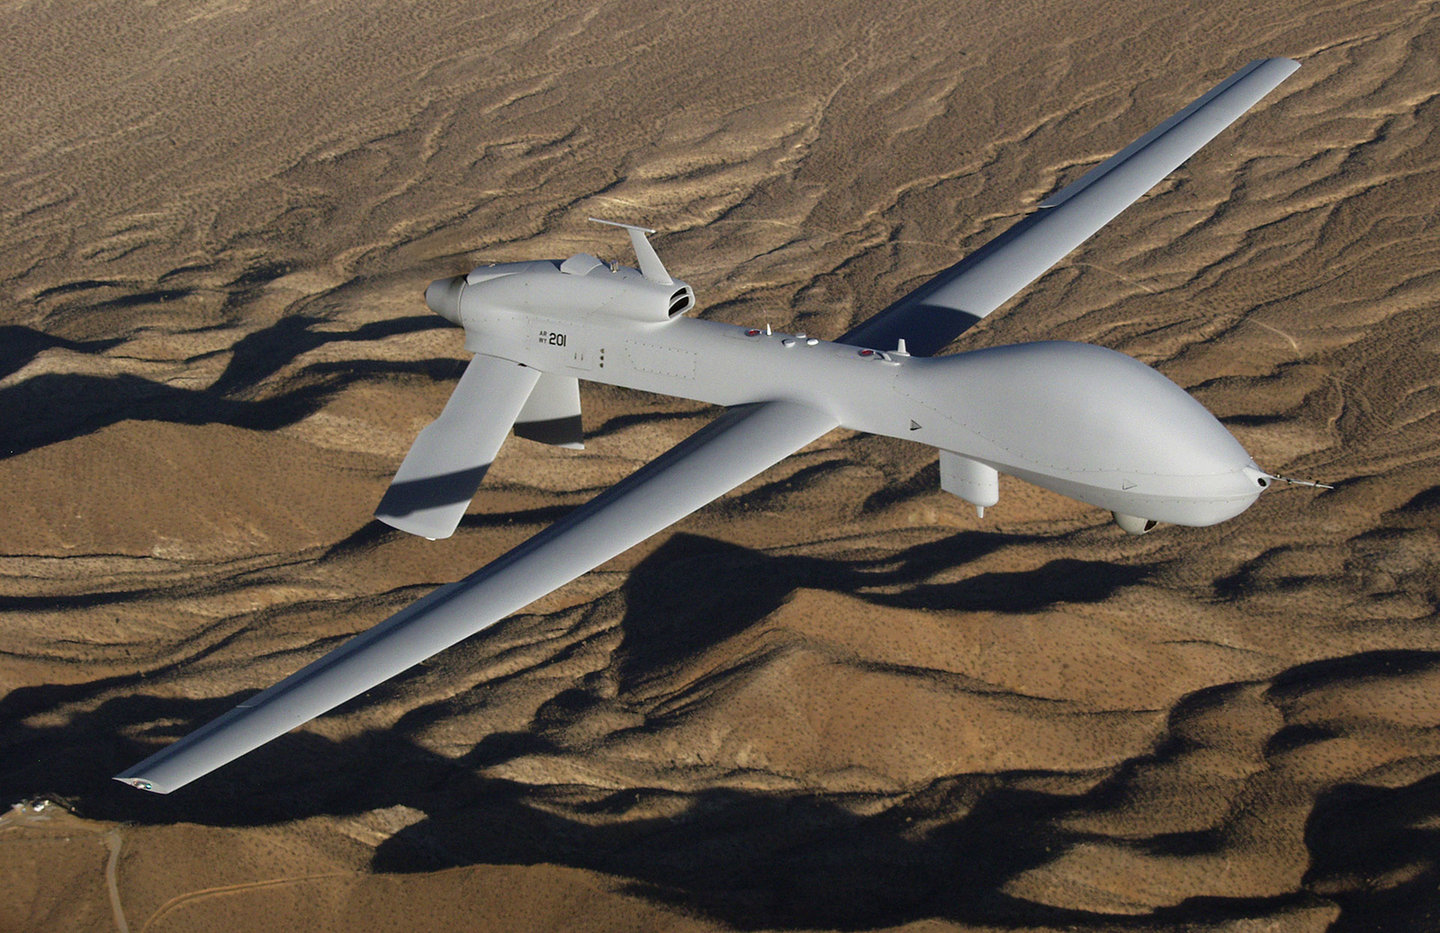 The US Arm will equip its MQ-1C Gray Eagle with an EW pod from Lockheed Martin